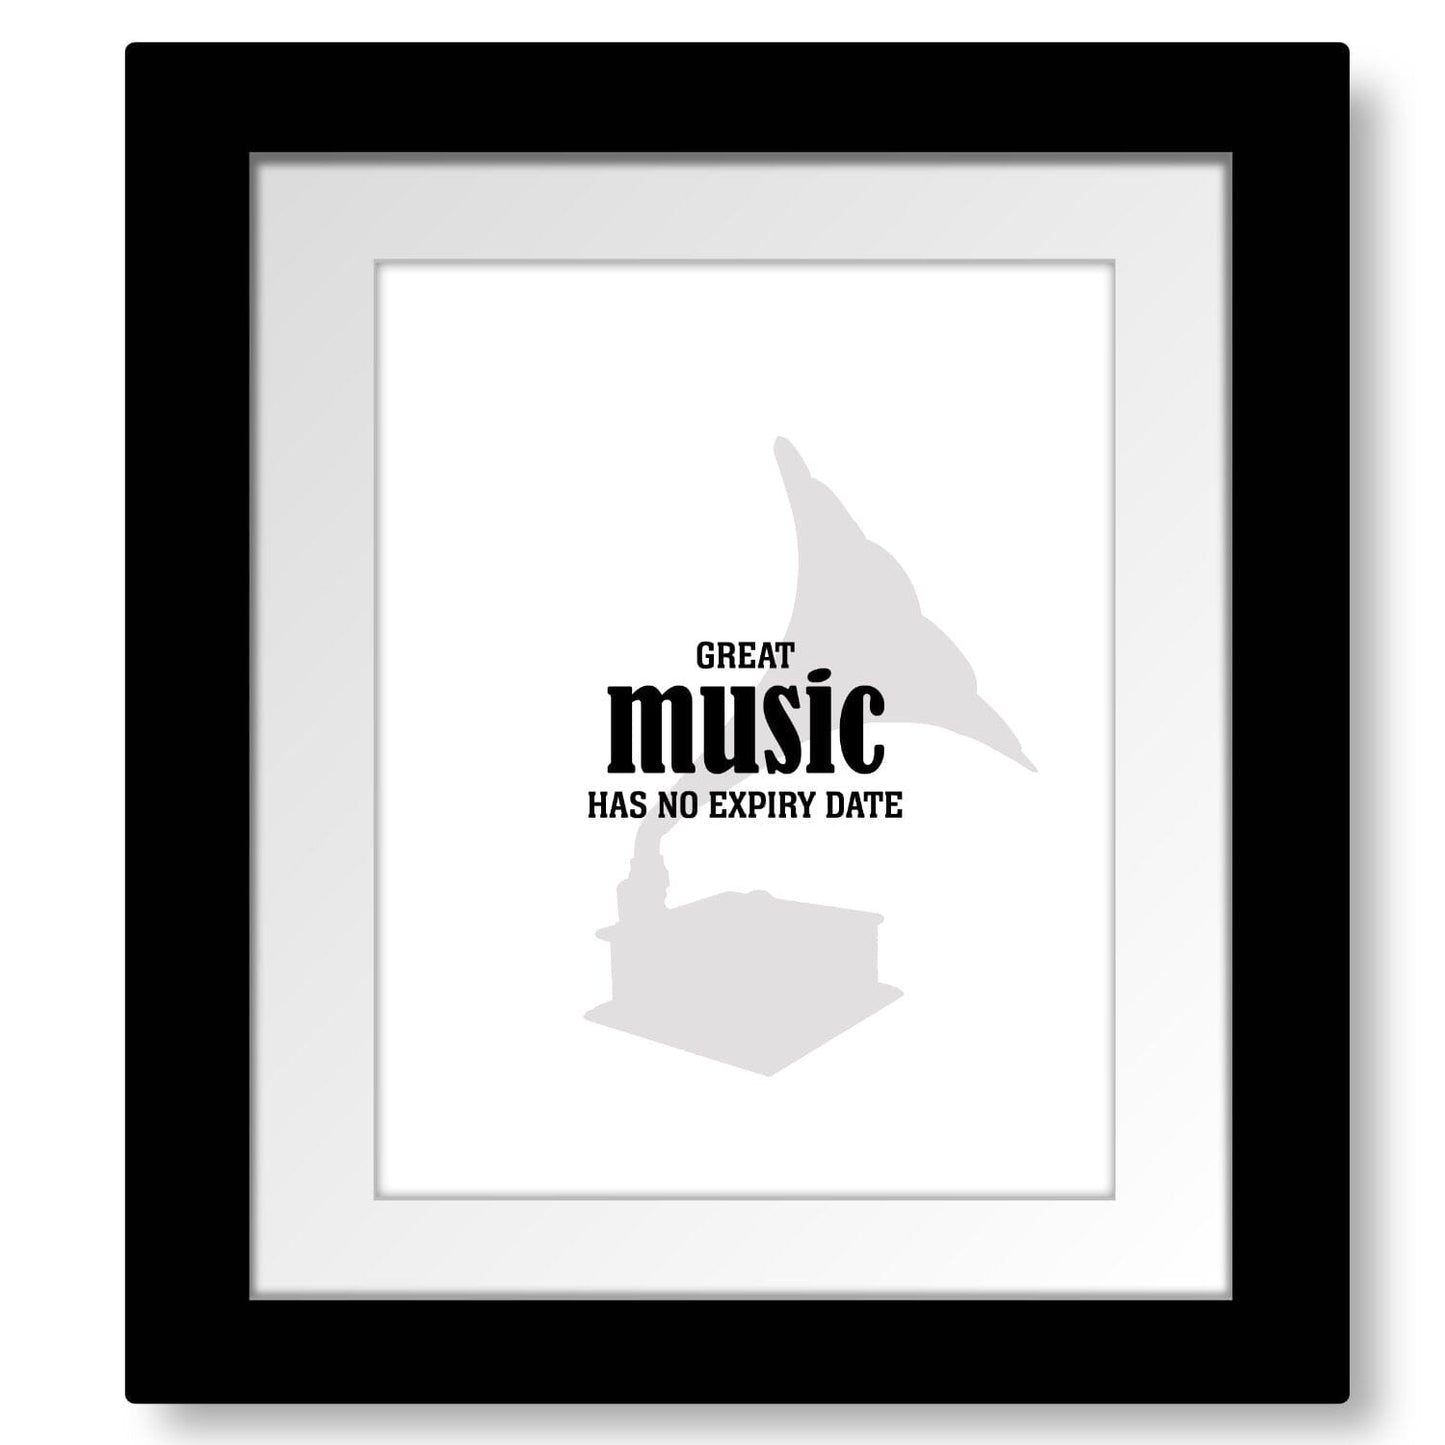 Great Music Has No Expiry Date - Wise and Witty Art Wise and Wiseass Quotes Song Lyrics Art 8x10 Framed and Matted Print 